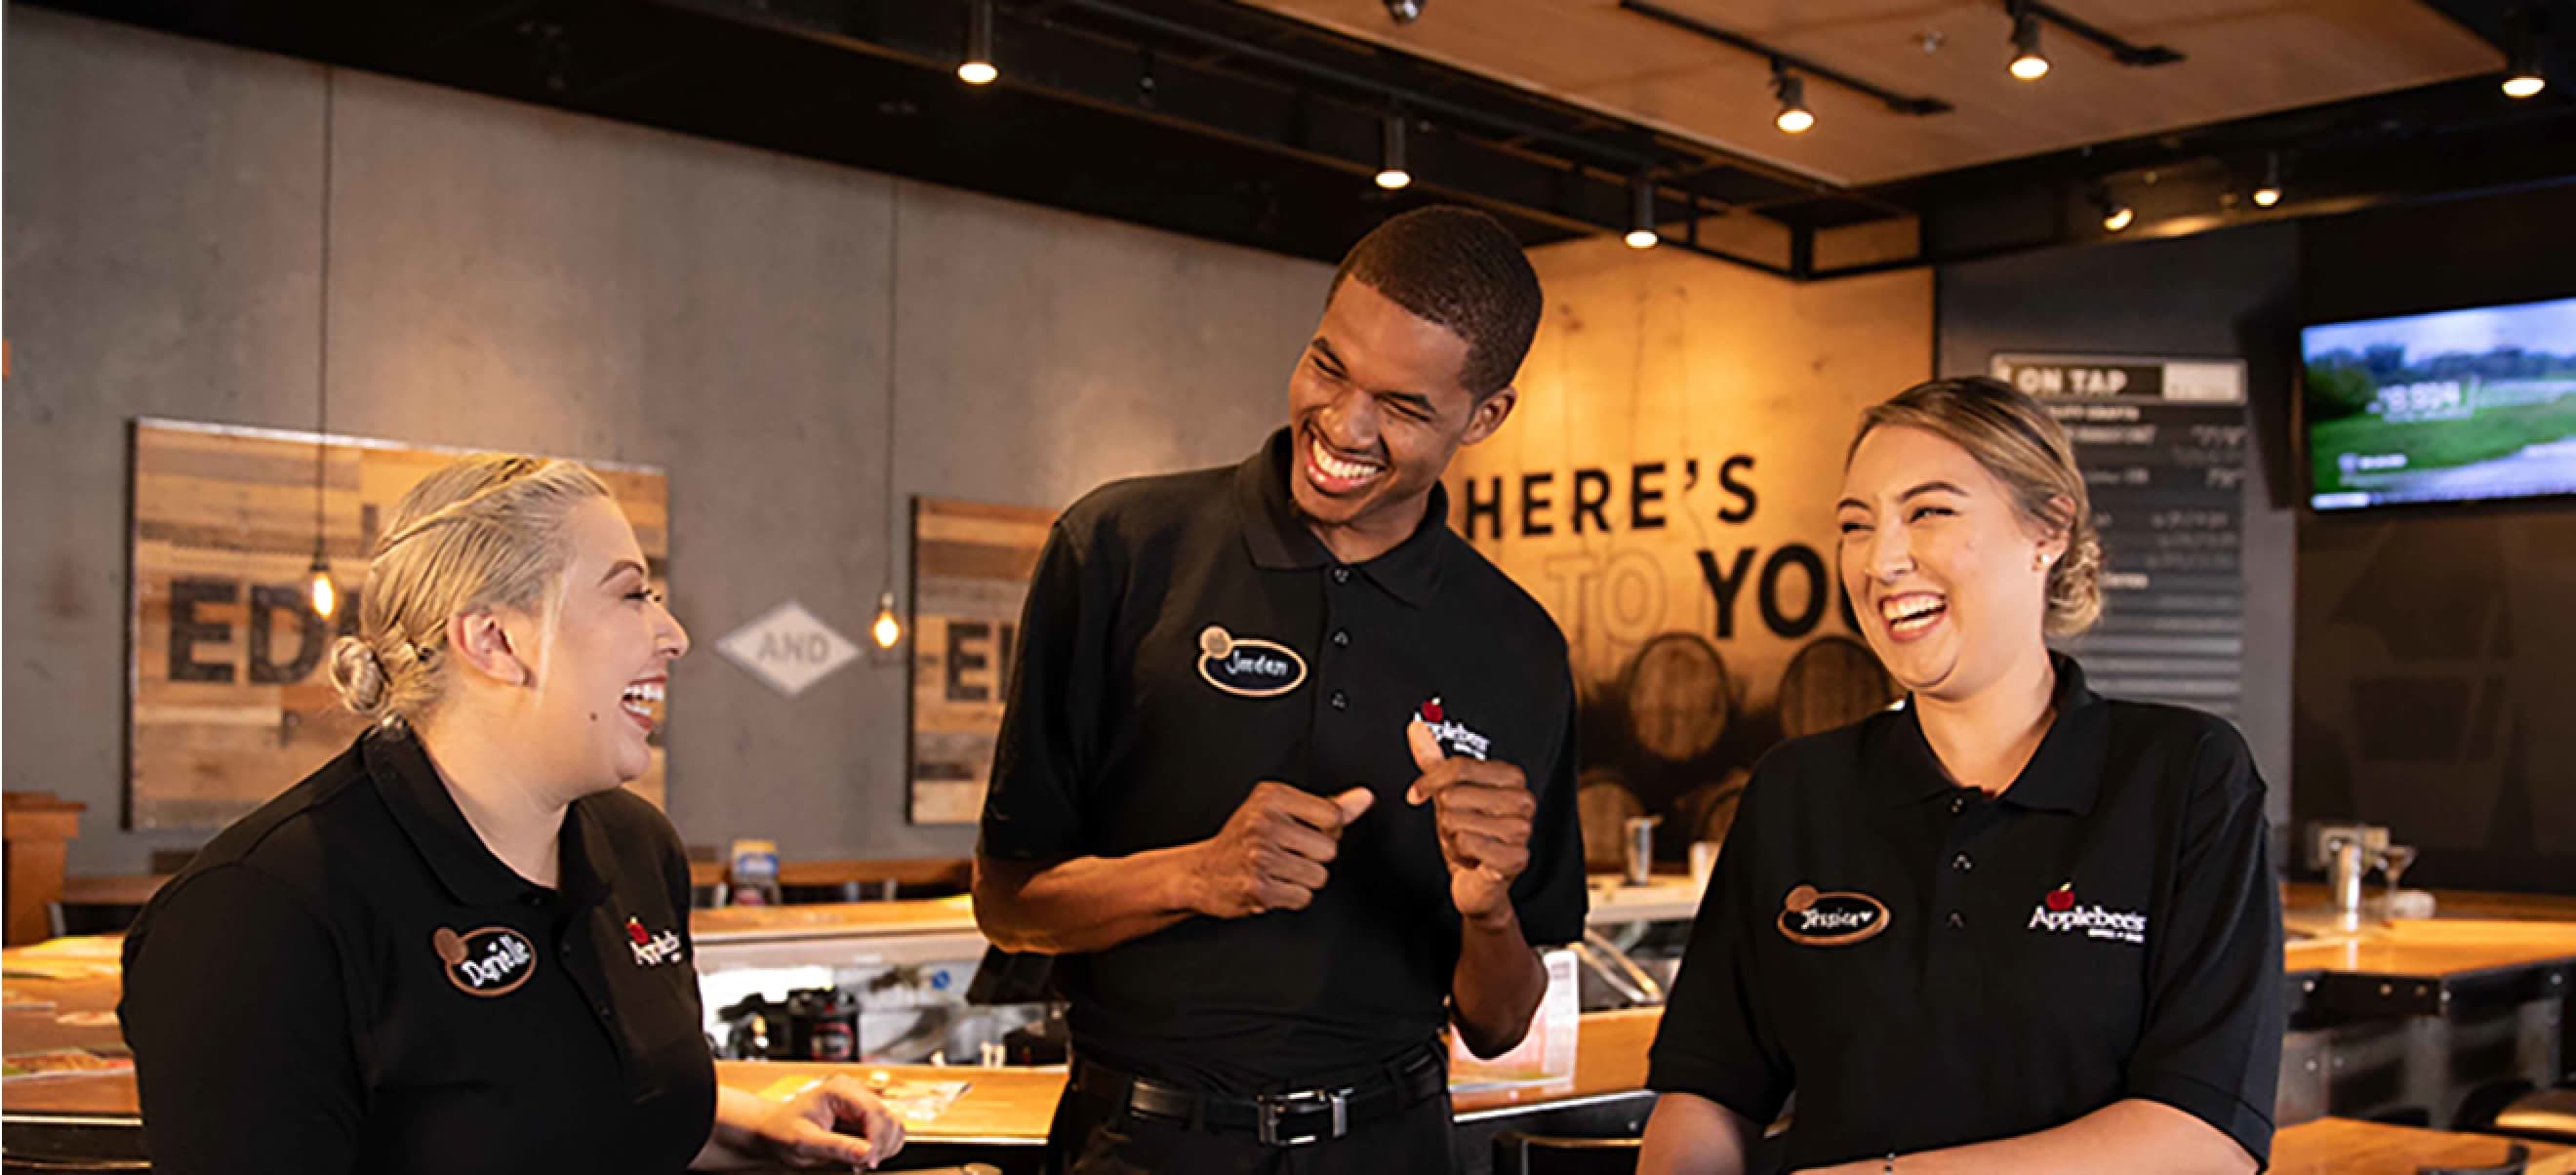 Three Applebee's employees in uniform, each wearing a name tag, stand behind a counter, smiling and engaging in conversation inside a modern restaurant.